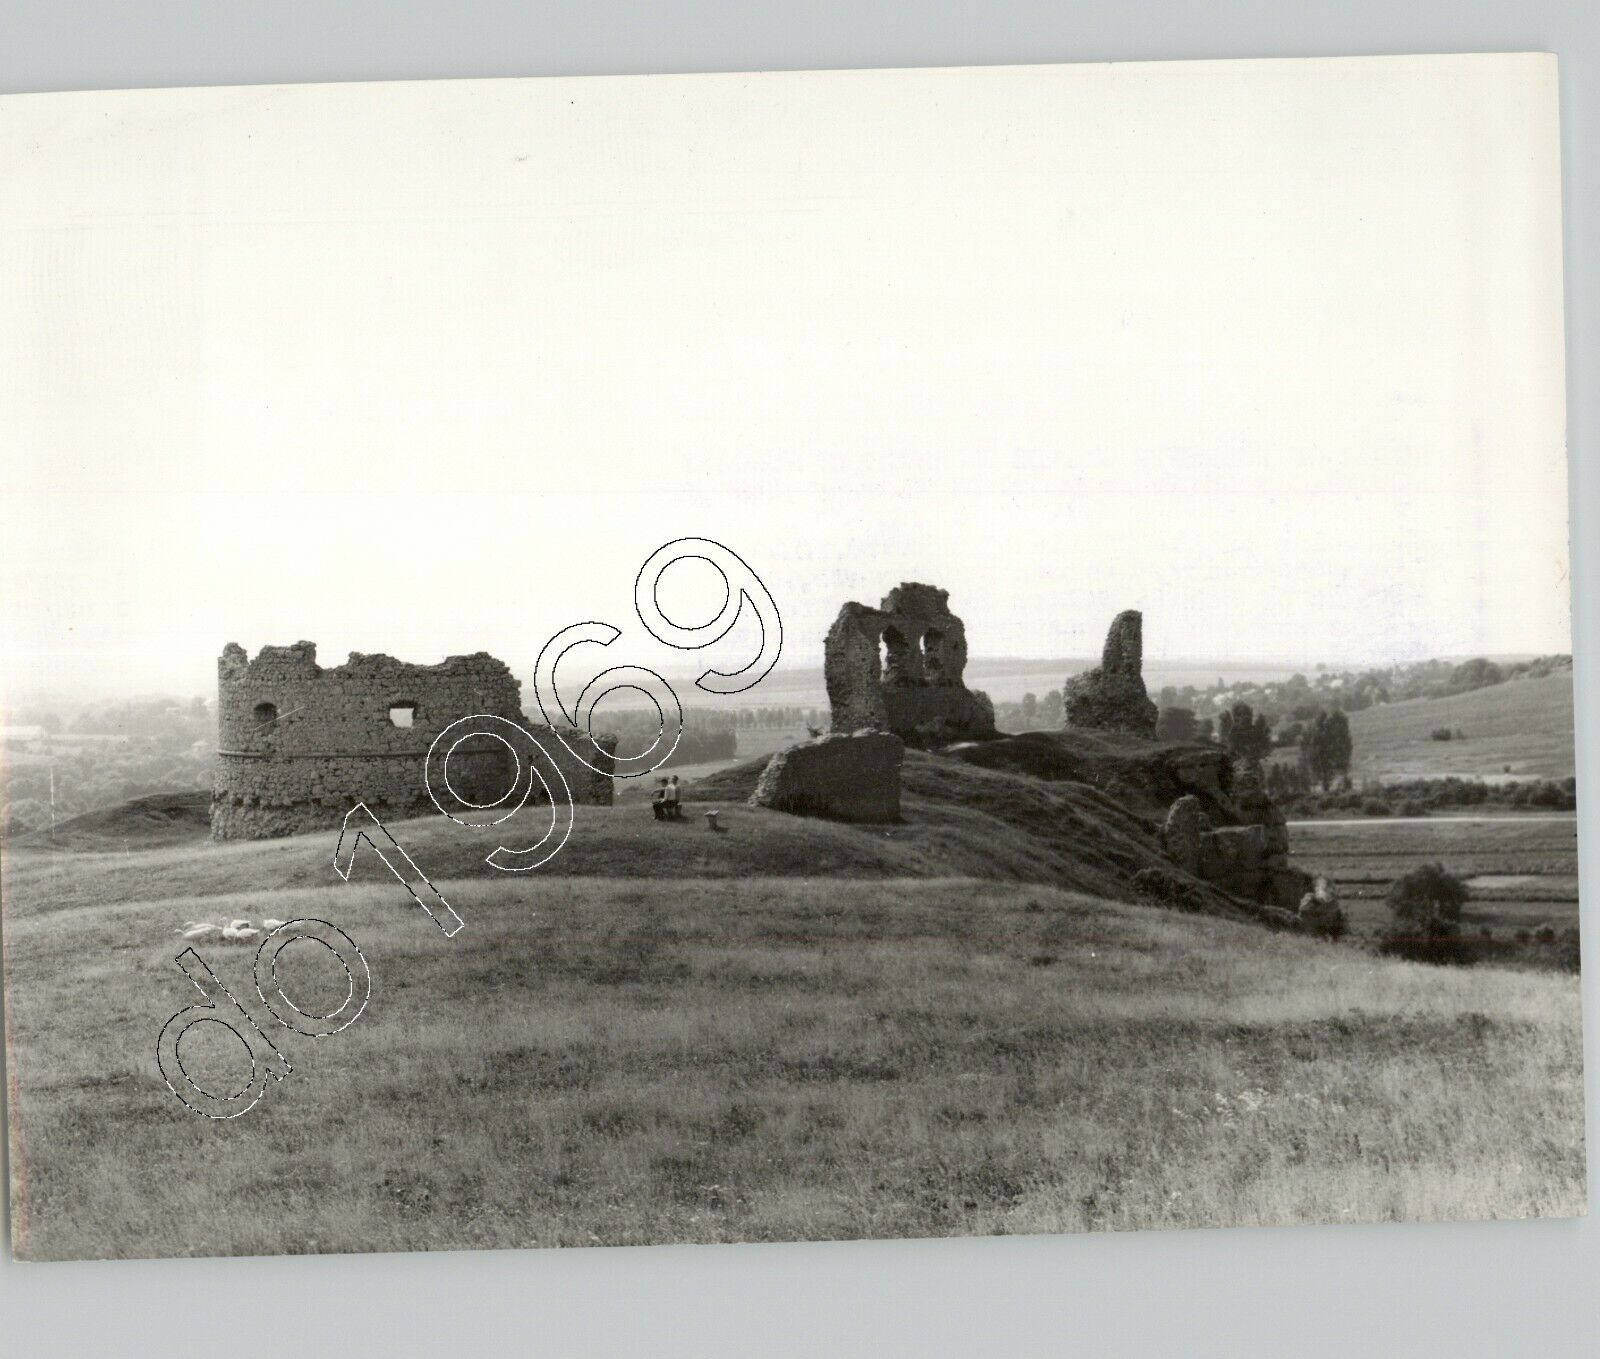 Sigh of Scenic Beauty @ Ruins of DOBRONTE CASTLE Hungary 1970s Press Photo